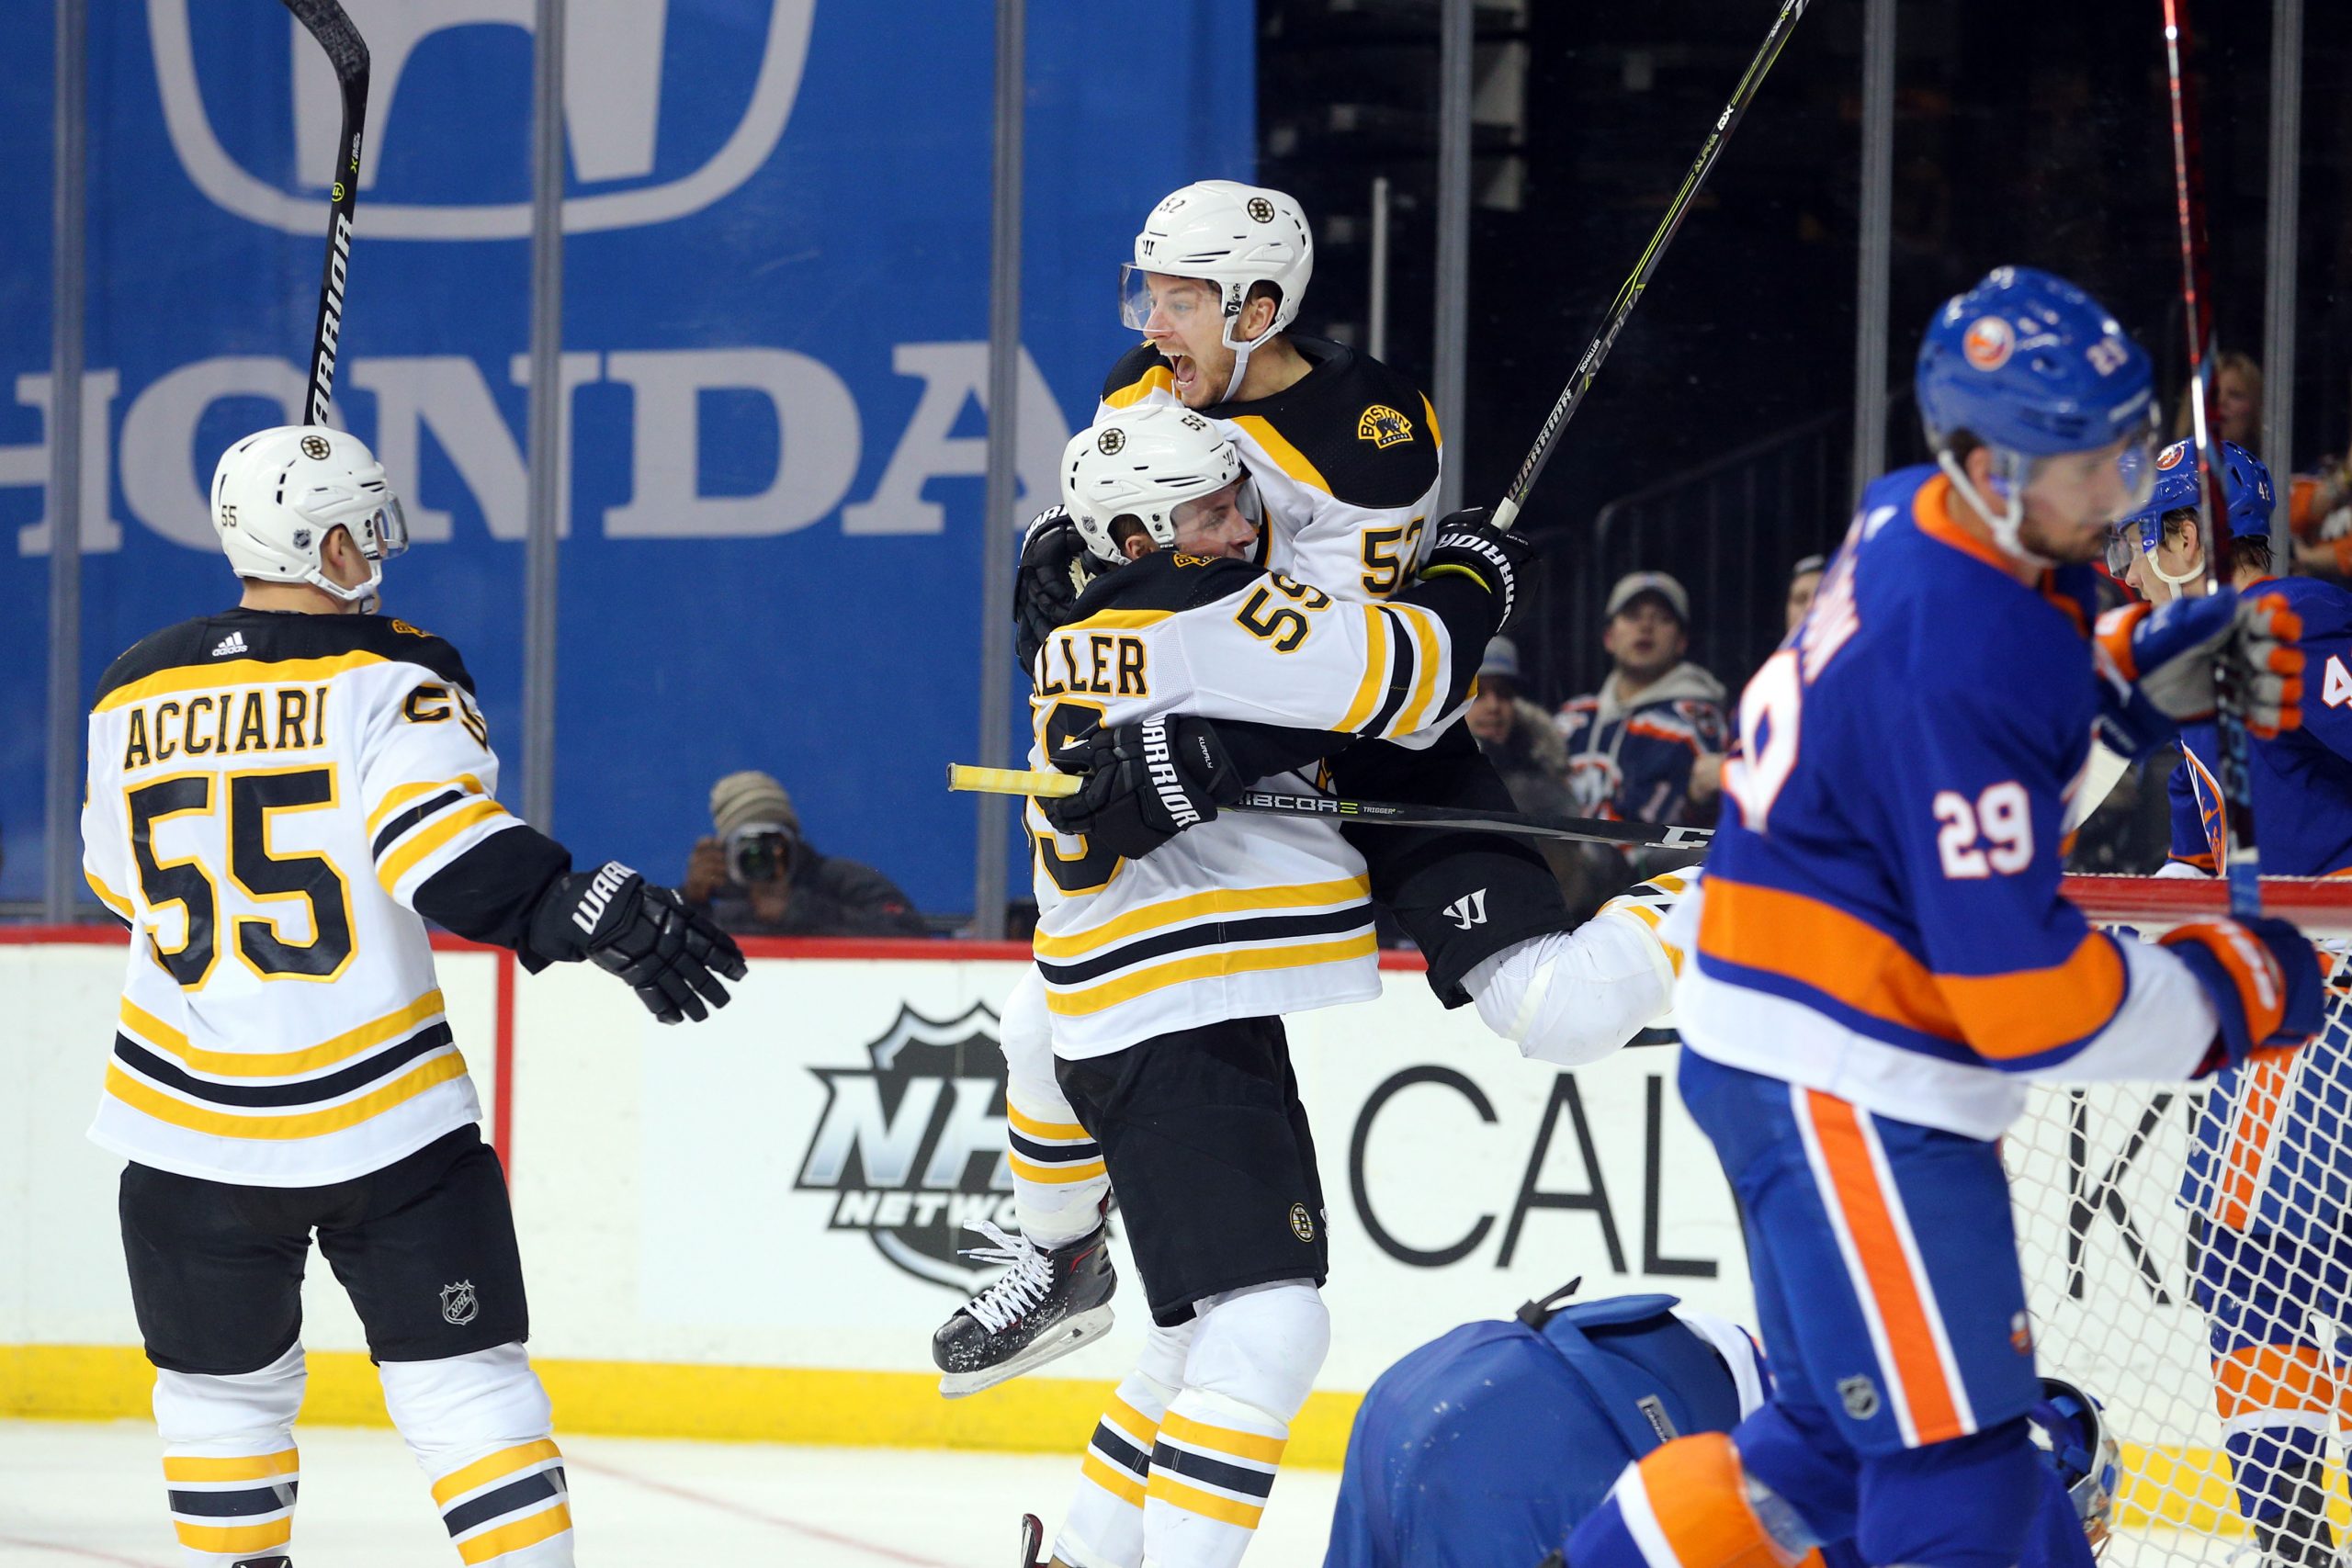 Jan 2, 2018; Brooklyn, NY, USA; Boston Bruins left wing Tim Schaller (59) celebrates his goal against the New York Islanders with Boston Bruins center Sean Kuraly (52) during the third period at Barclays Center. Mandatory Credit: Brad Penner-USA TODAY Sports